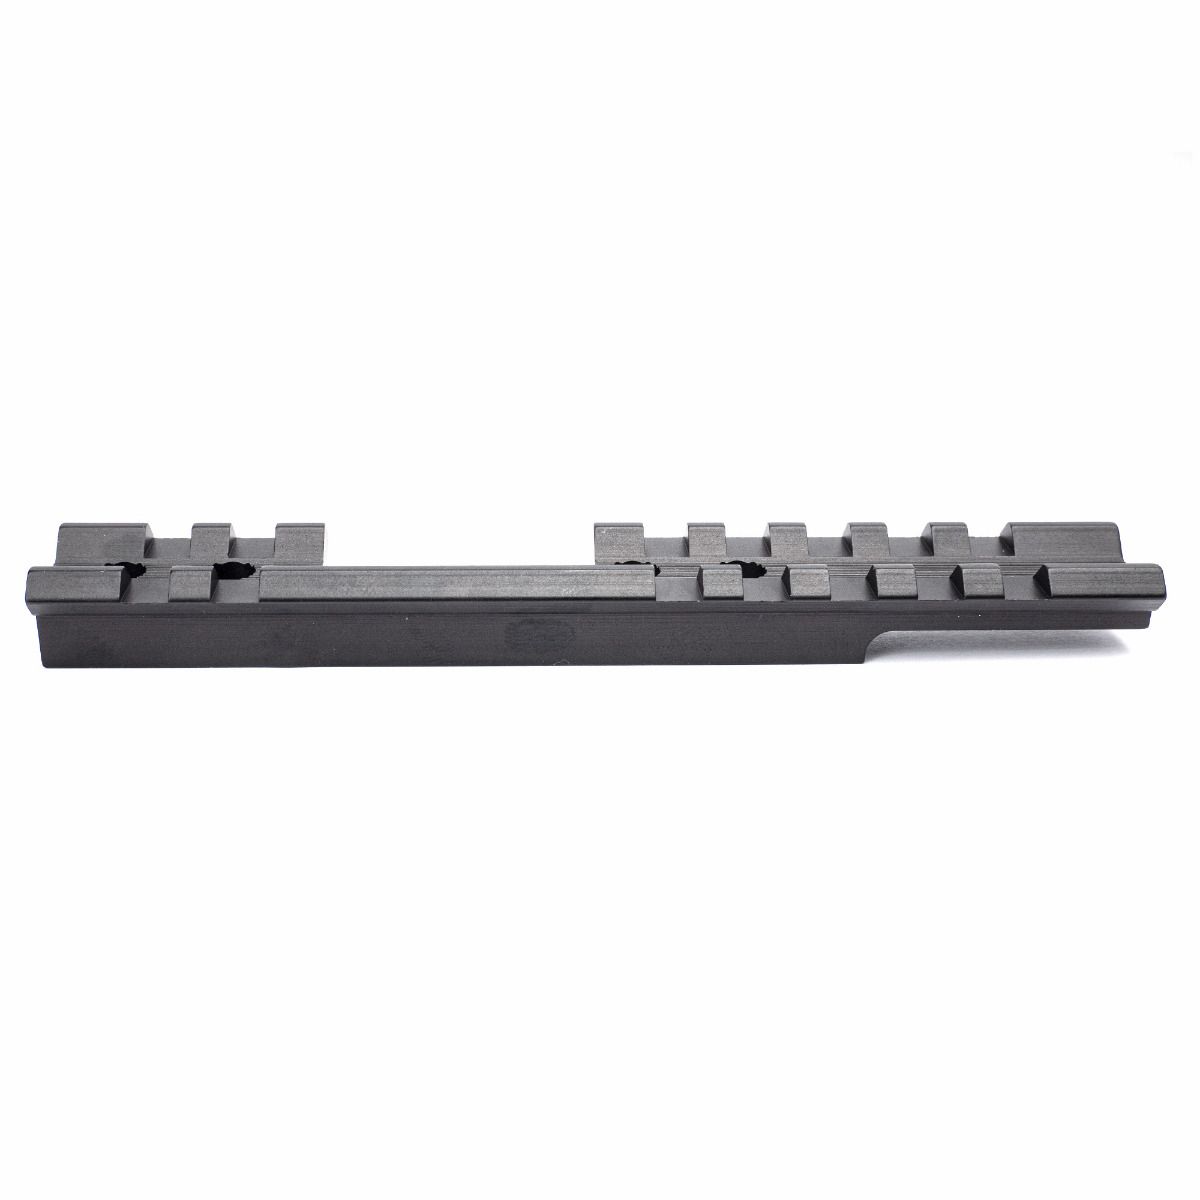 EGW Savage Rascal Picatinny Rail Scope Mount with Left Hand Cut Large Ejection Port Cutout